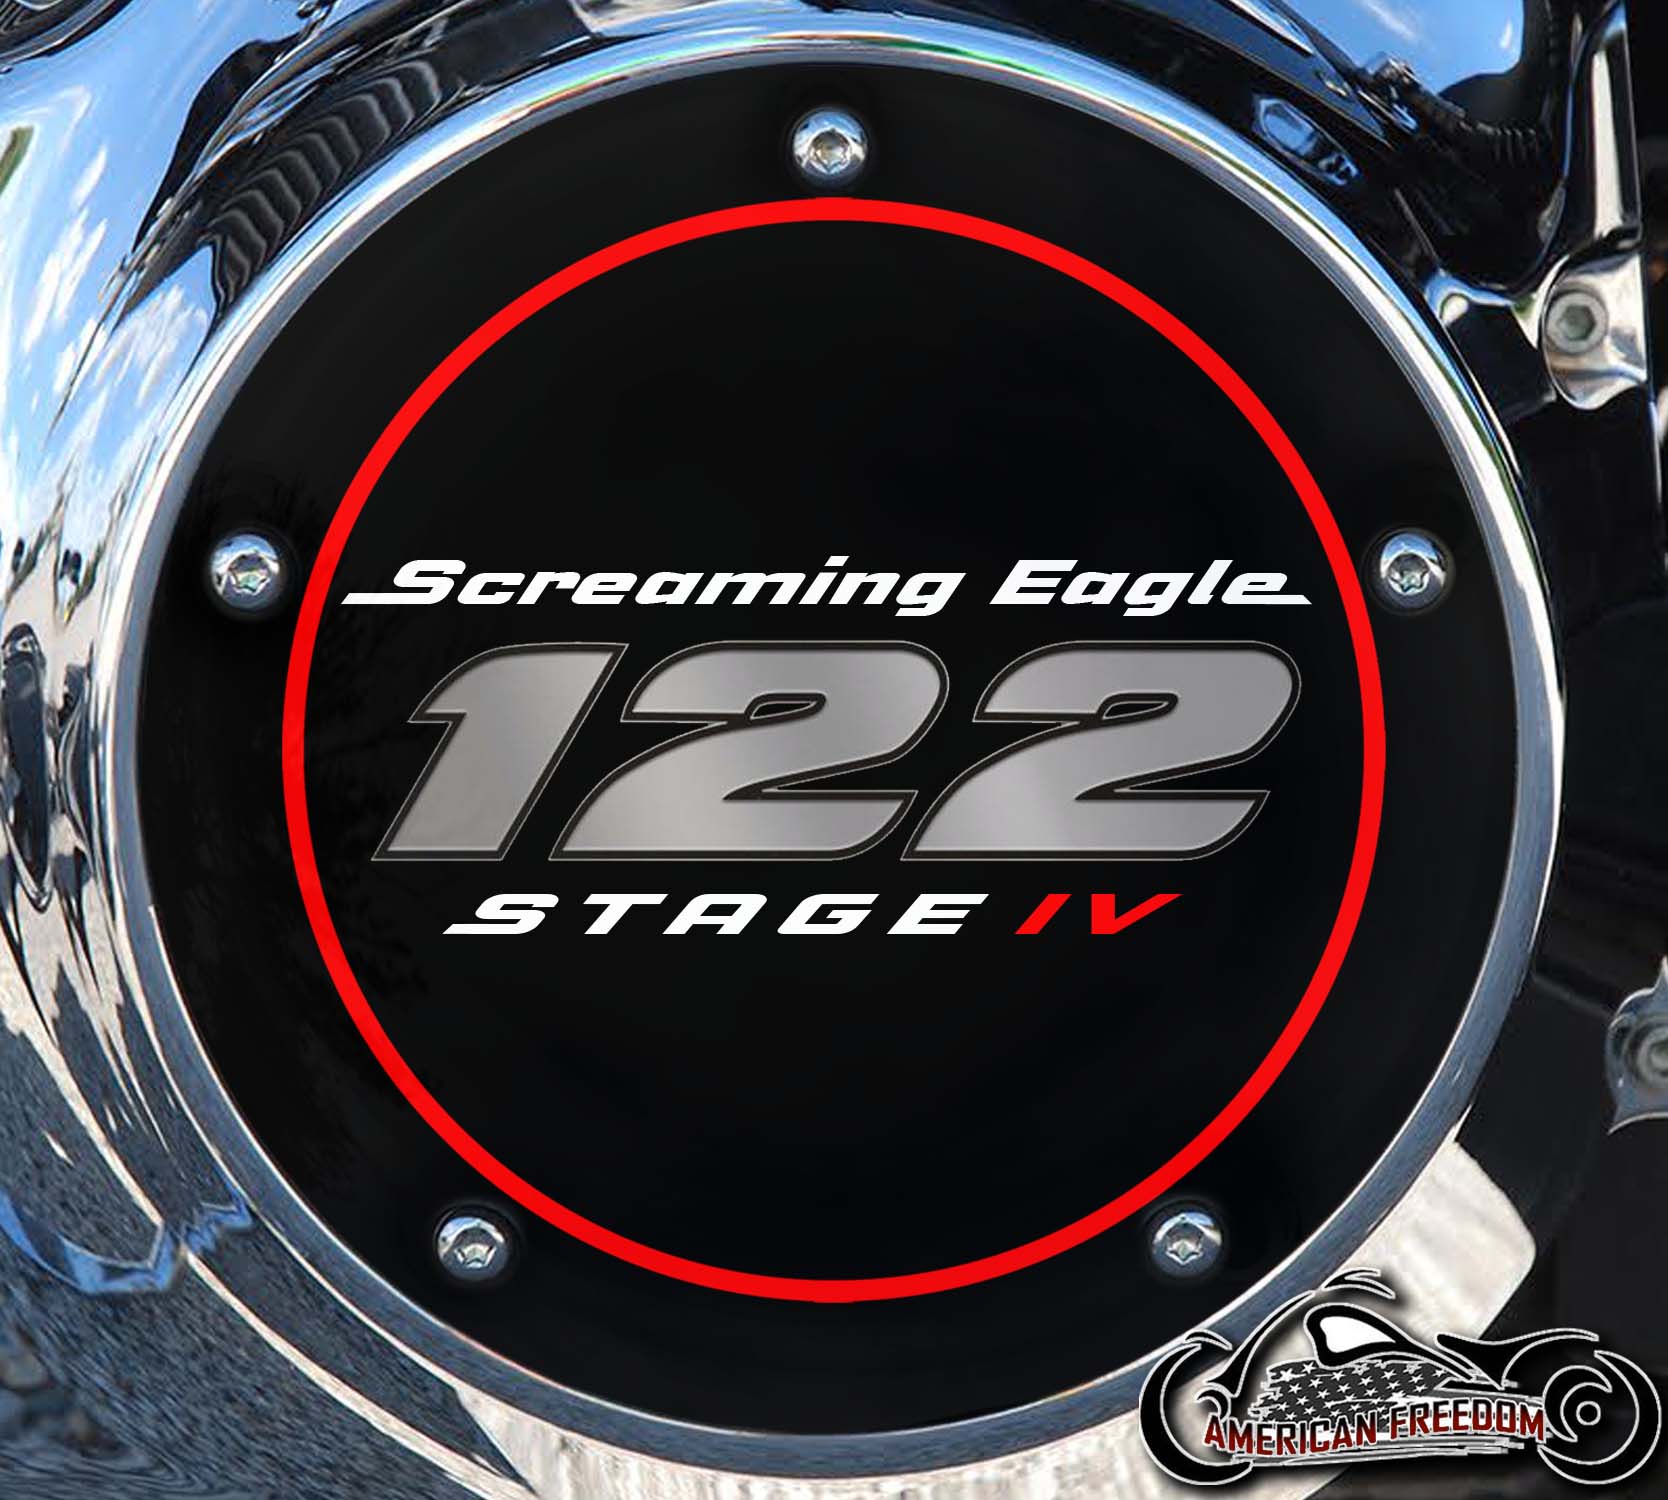 Screaming Eagle Stage IV 122 Derby Cover OL